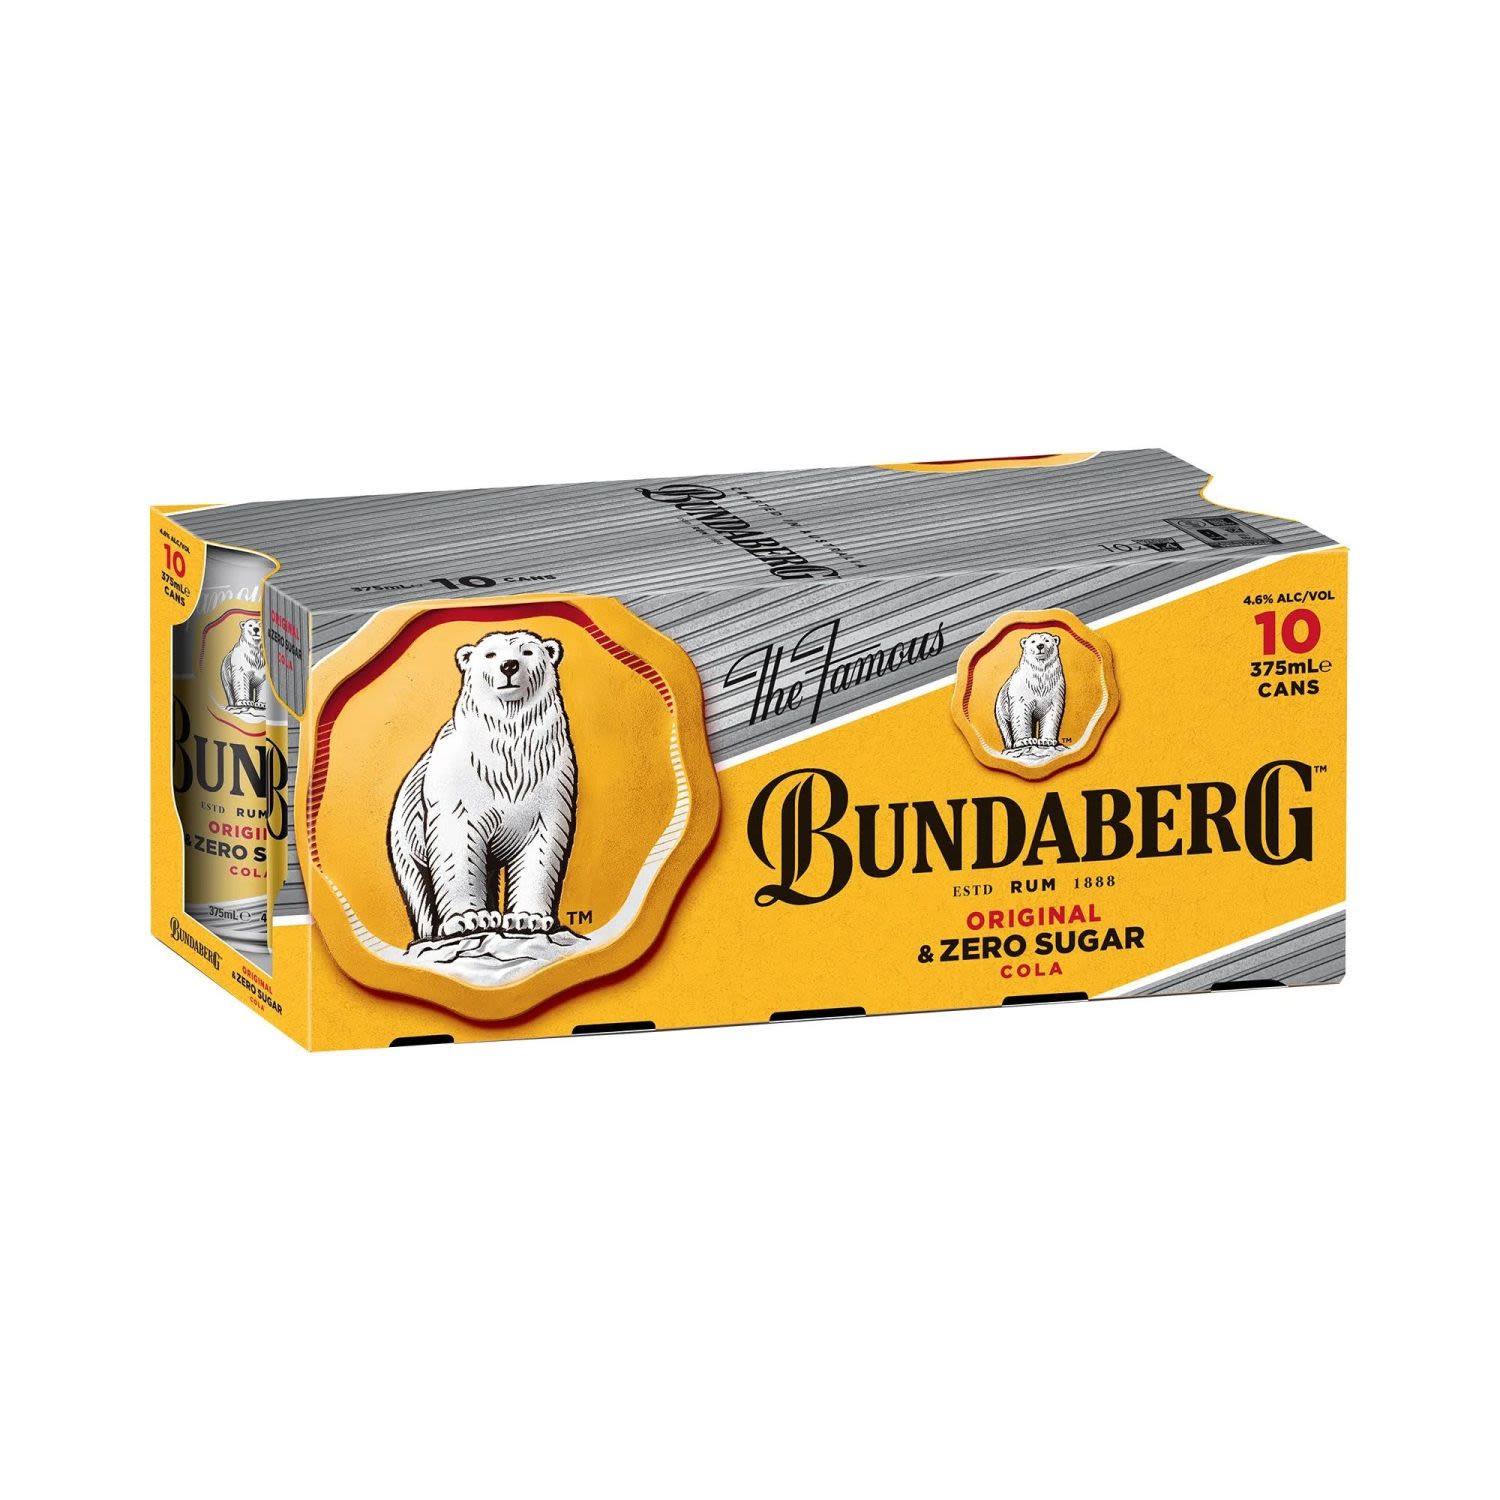 Sweetly scented with hints of oak, complimented by the sweetness of the cola<br /> <br />Alcohol Volume: 4.60%<br /><br />Pack Format: 10 Pack<br /><br />Standard Drinks: 1.4</br /><br />Pack Type: Can<br />